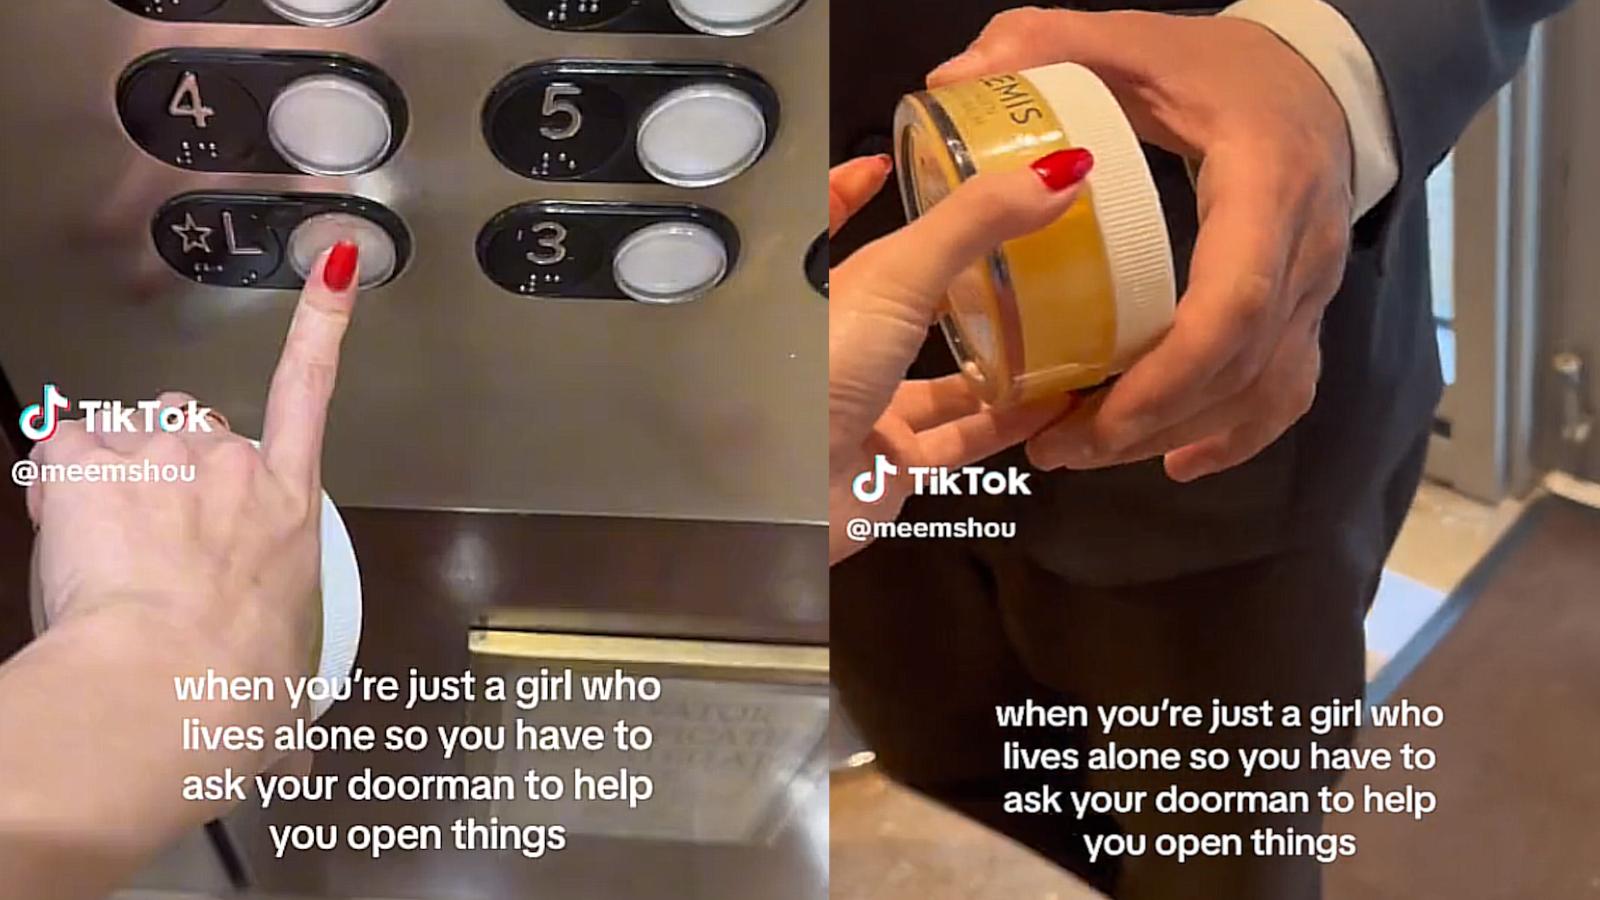 Woman hands a jar to her doorman in a foyer of her appratment complex